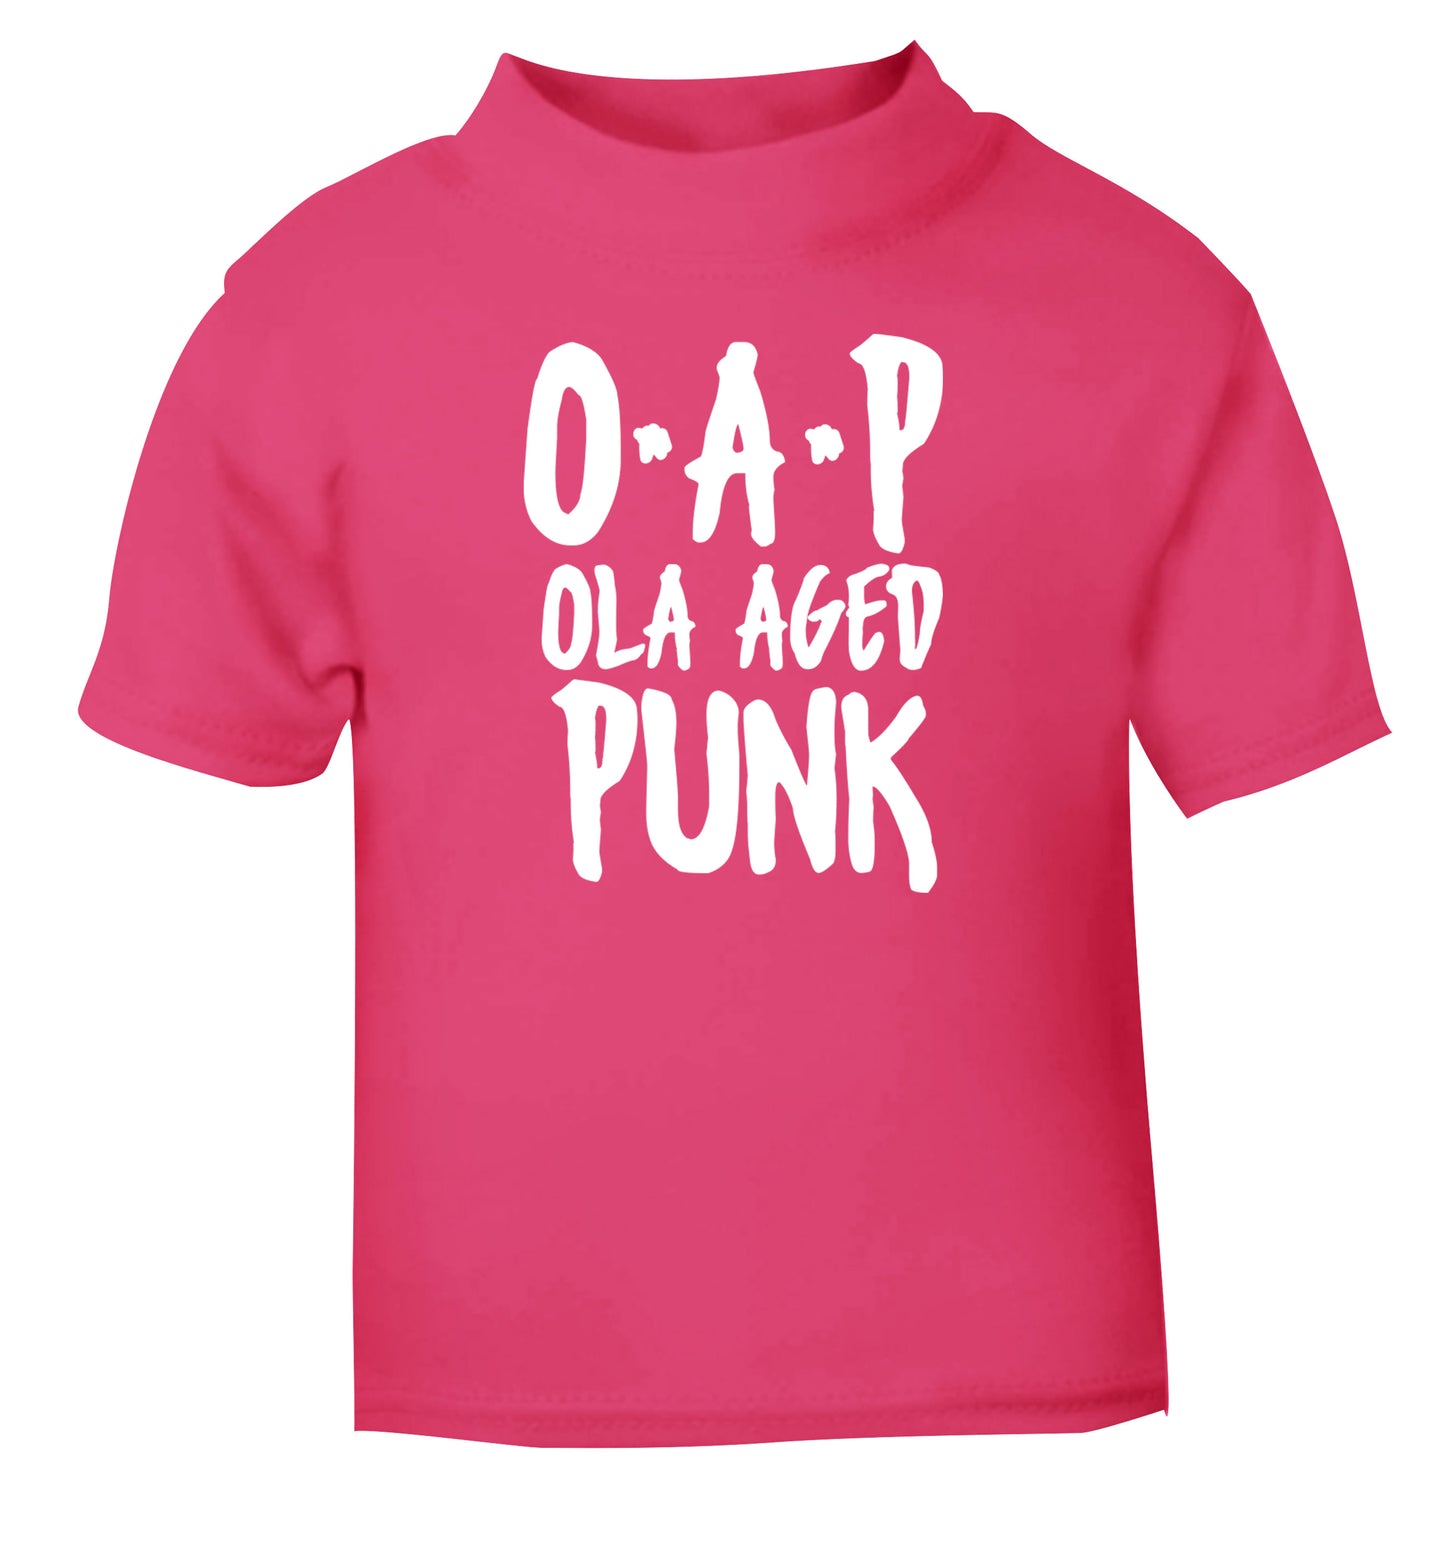 O.A.P Old Aged Punk pink Baby Toddler Tshirt 2 Years